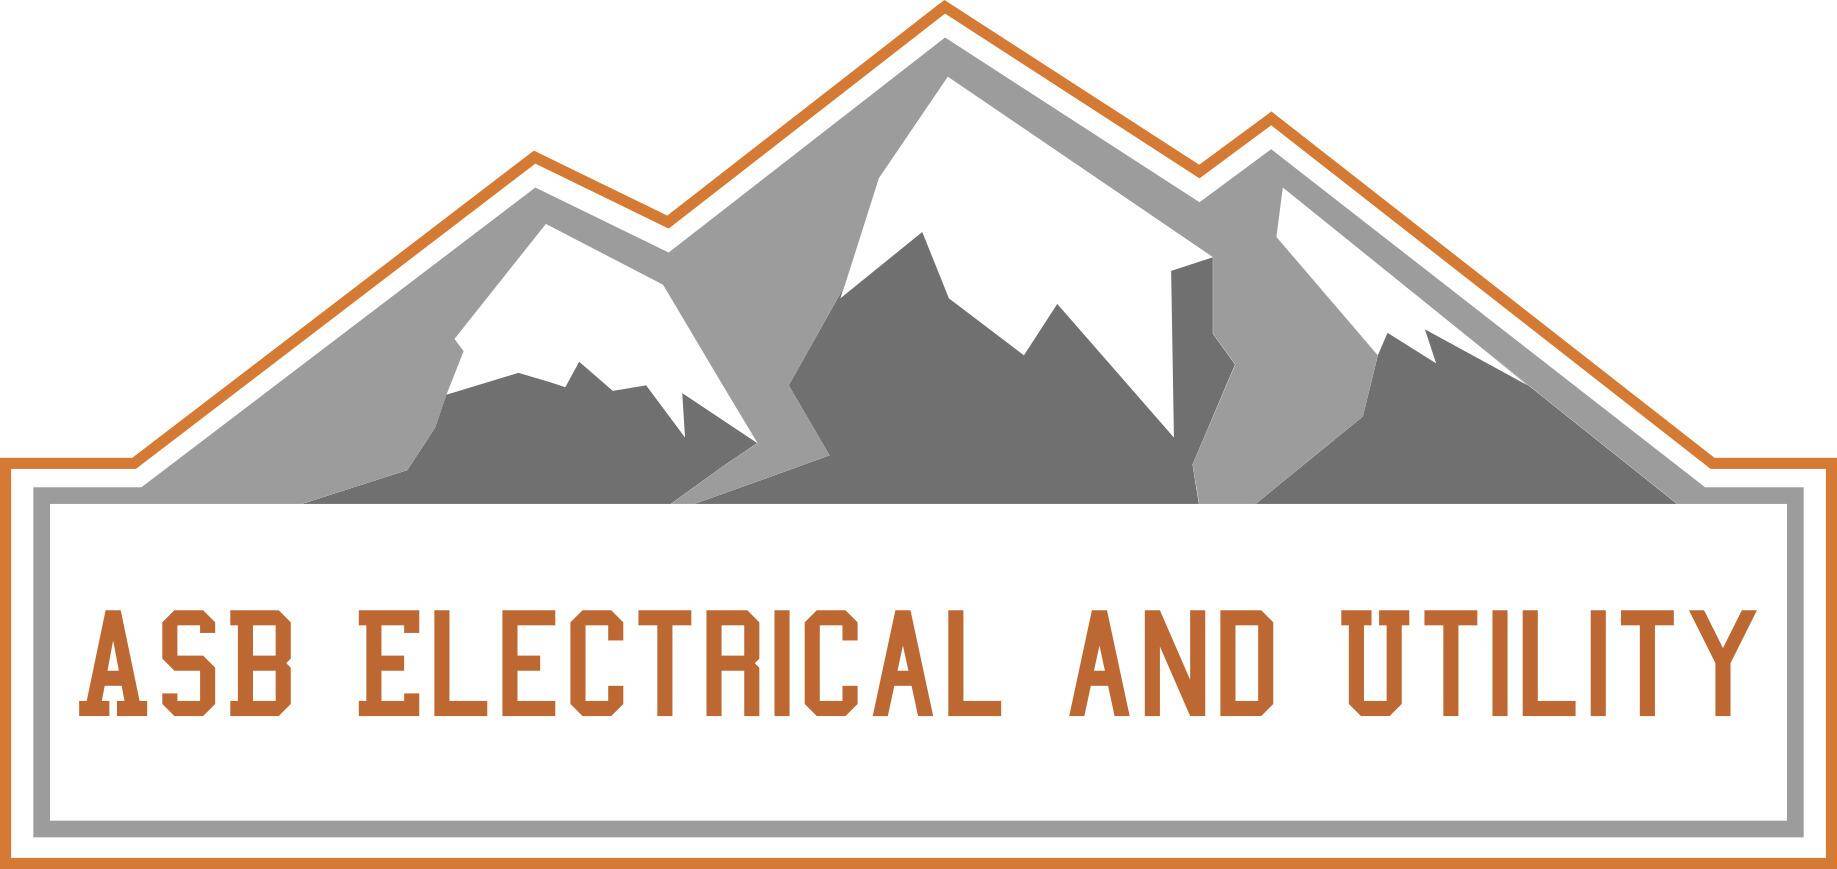 ASB Electrical and Utility